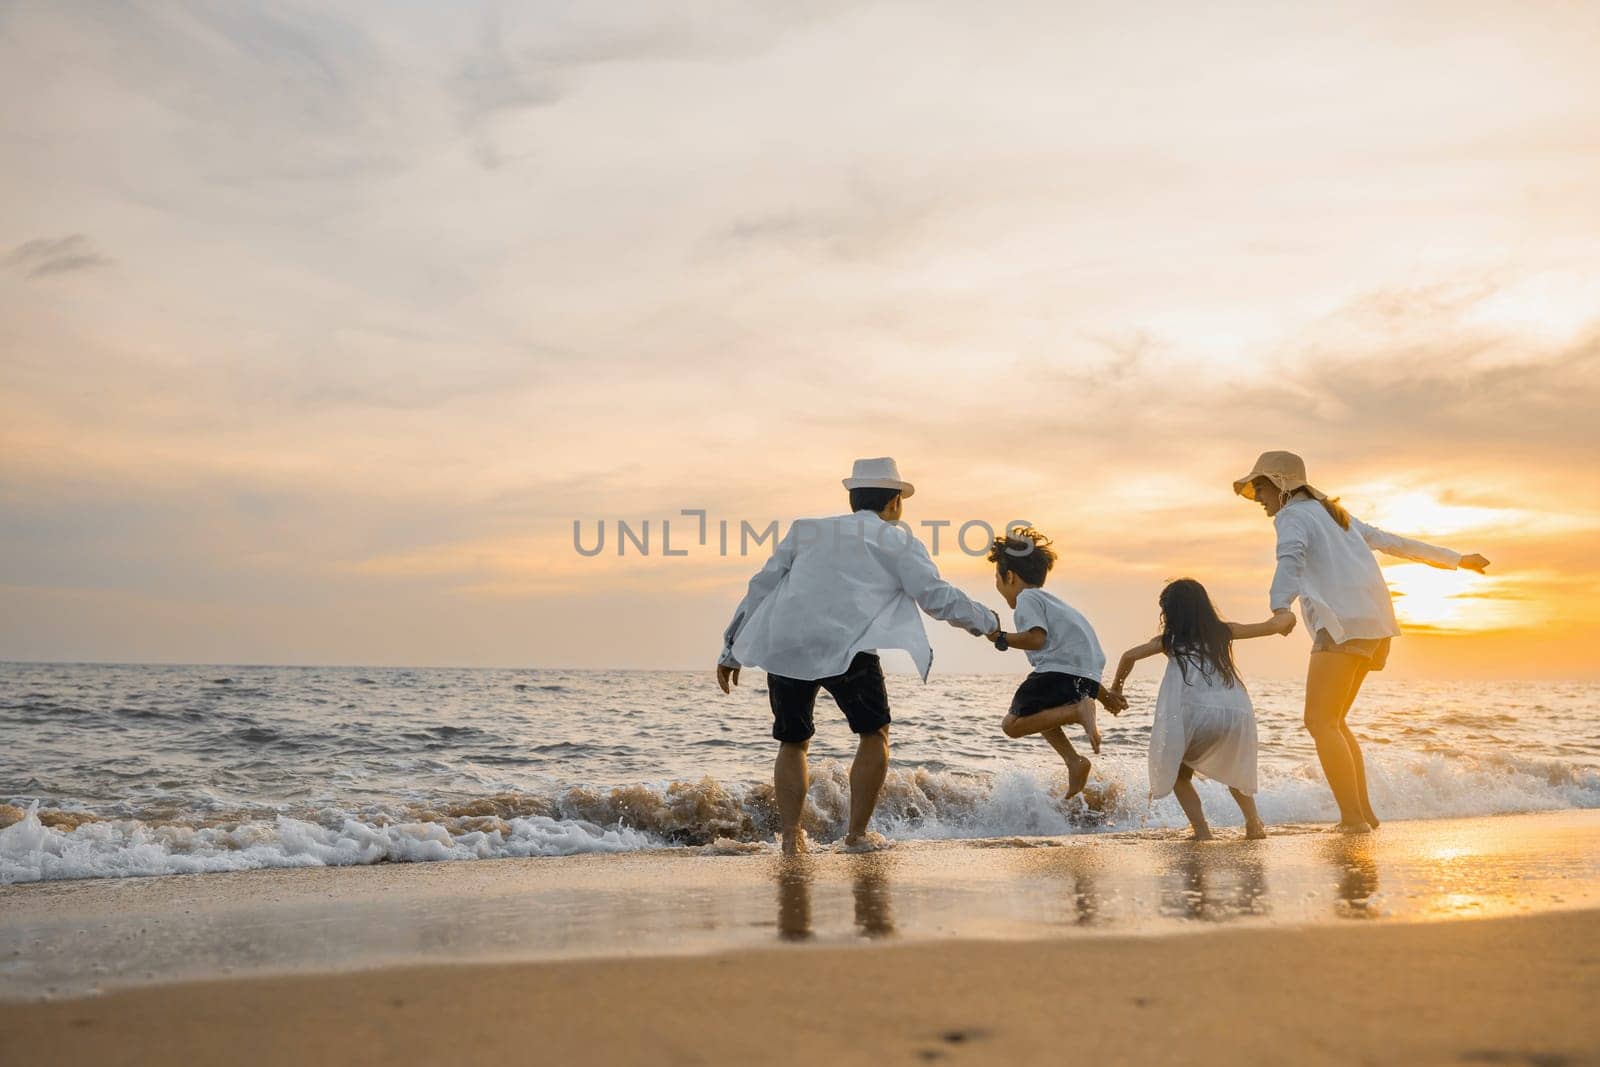 Happy family have fun jumping on beach in holiday at sunset, Back people enjoying travel trip and vacations, Silhouette of family father, mother, son and daughter holding hands jump together on beach